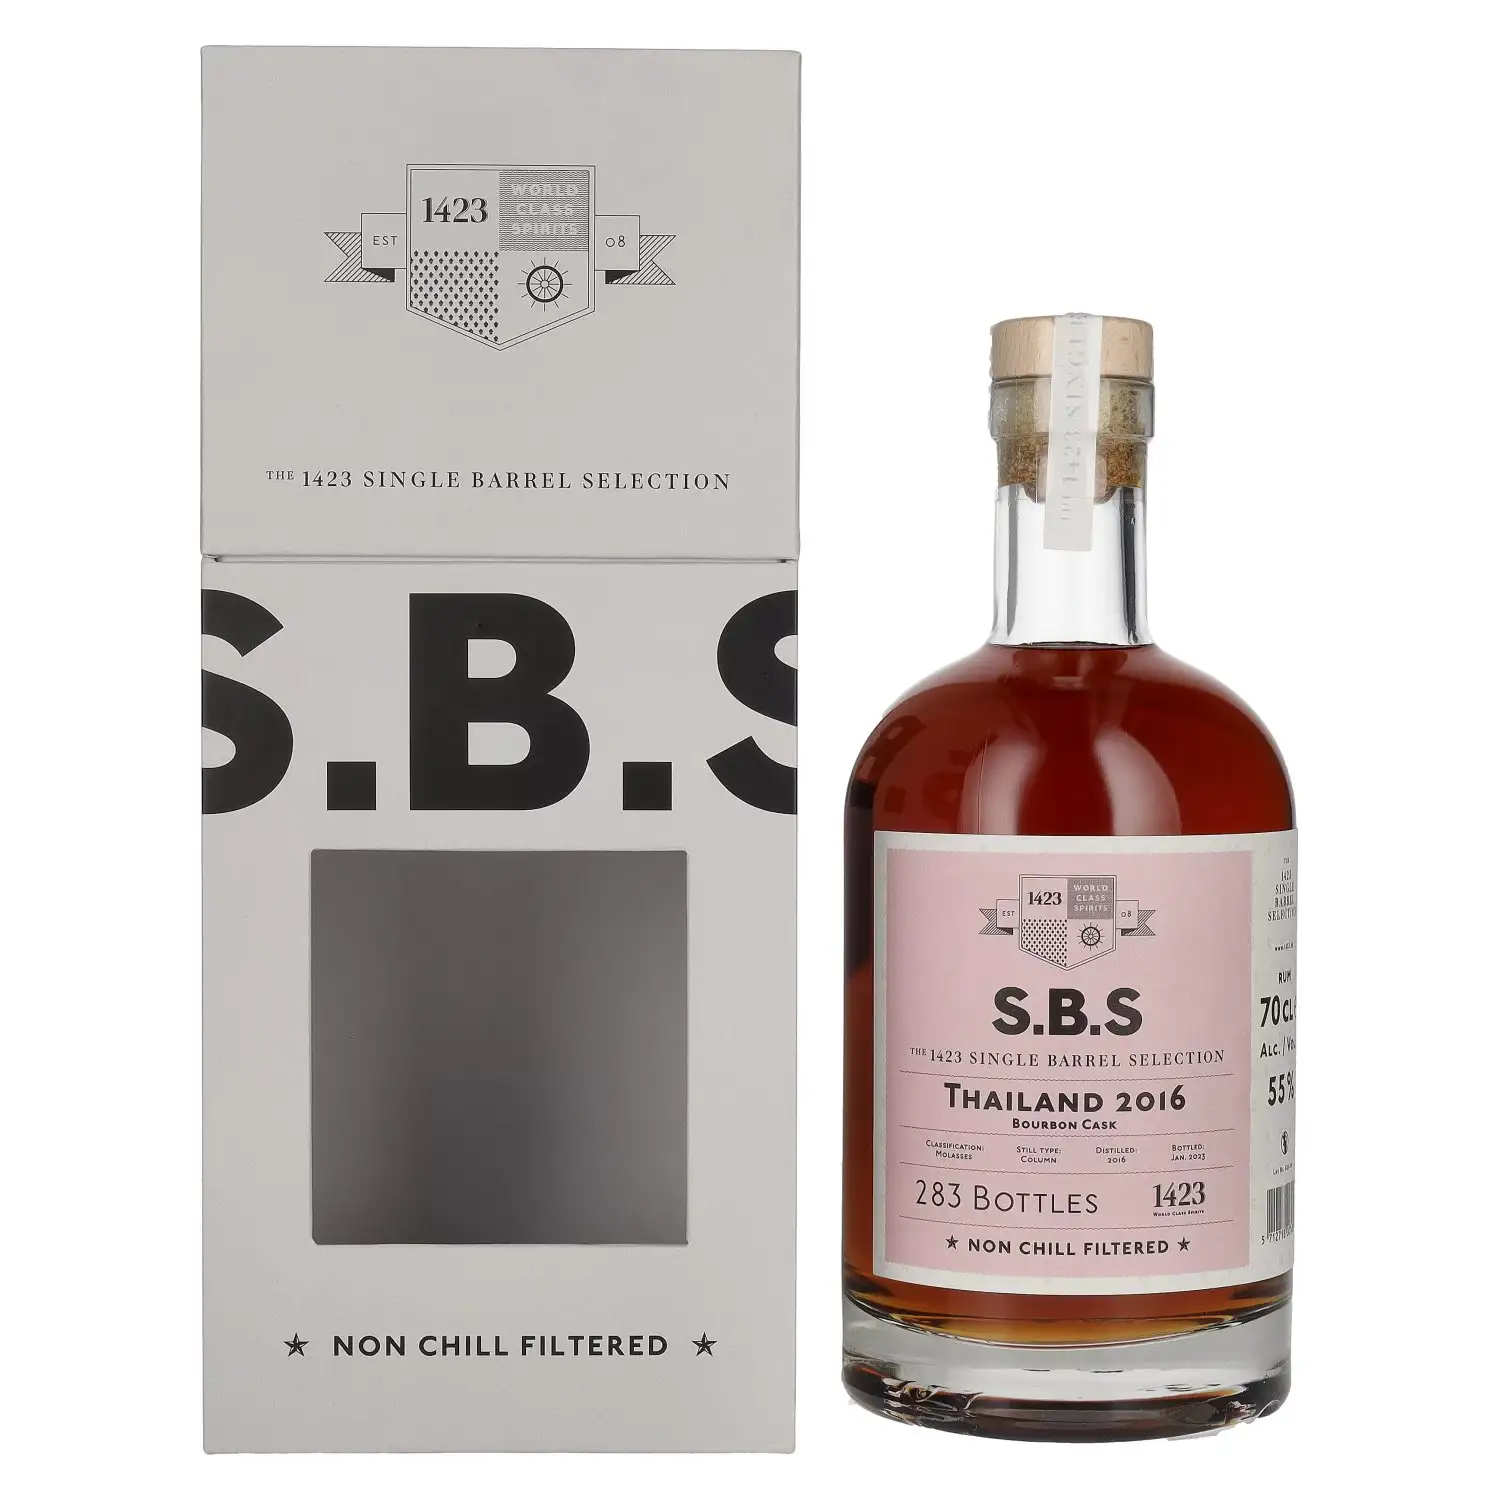 Image of the front of the bottle of the rum S.B.S Thailand 2016